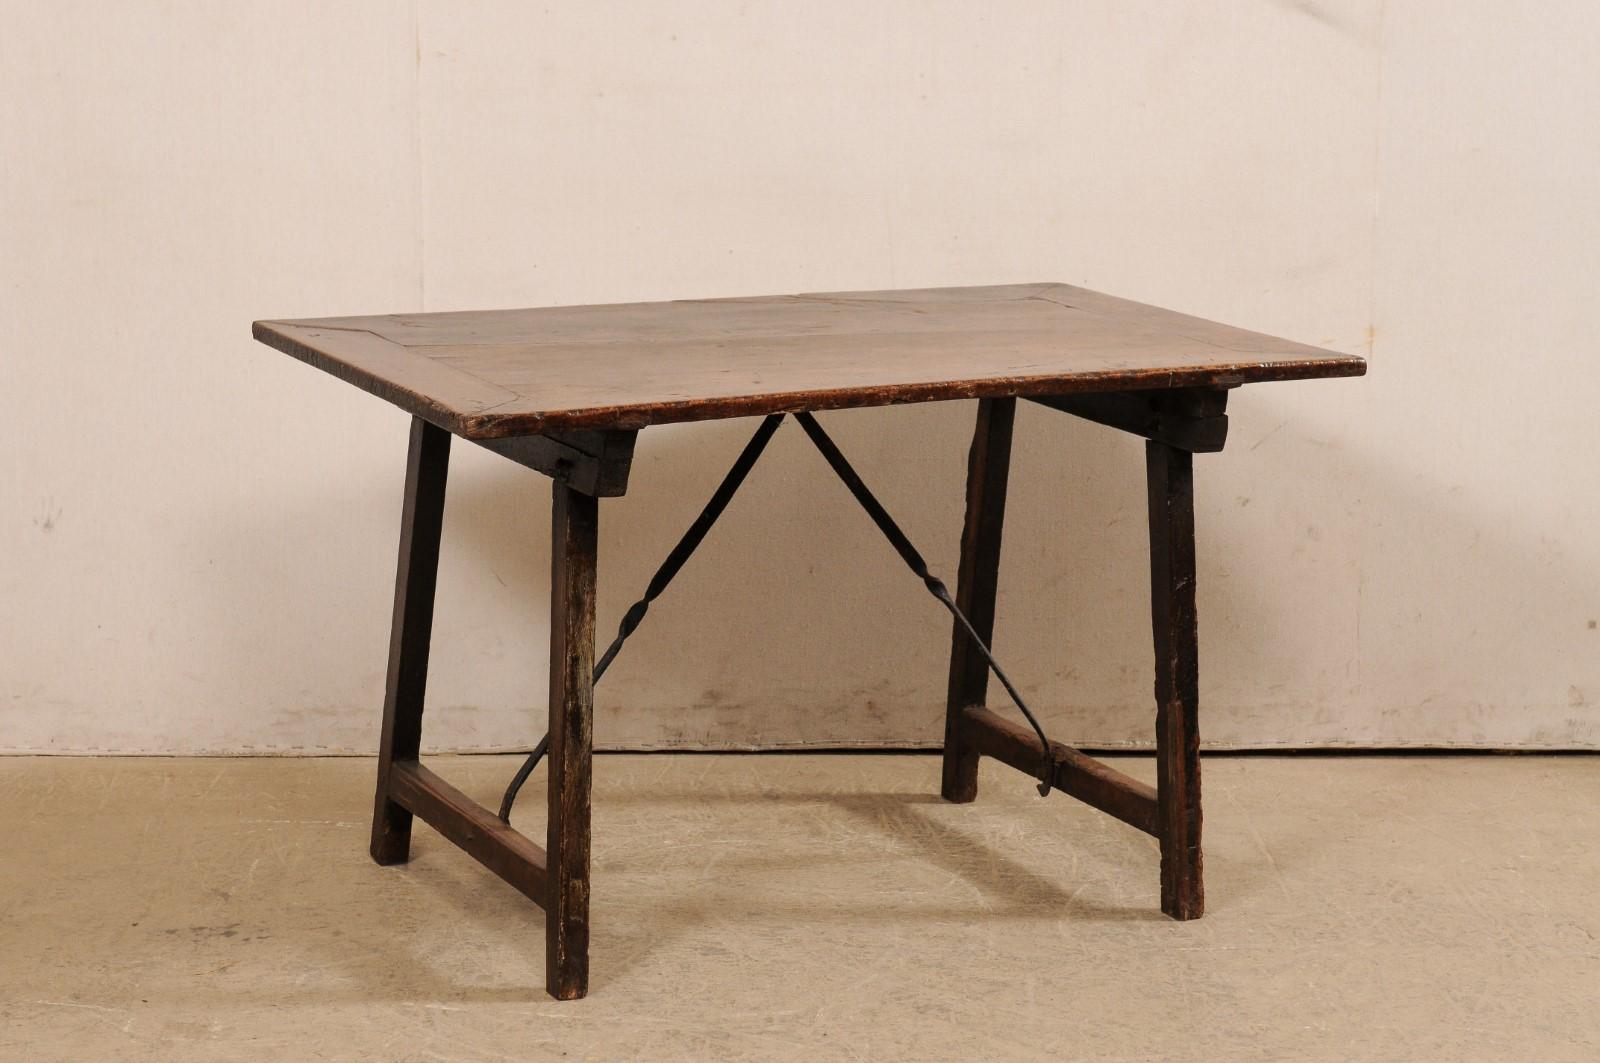 An Italian wood trestle-leg table with forged-iron stretcher bars, from the 18th century. This antique table from Italy has clean, simple lines, and features a rectangular-shaped top, raised upon a pair of trestle sawhorse-style legs, with a wood